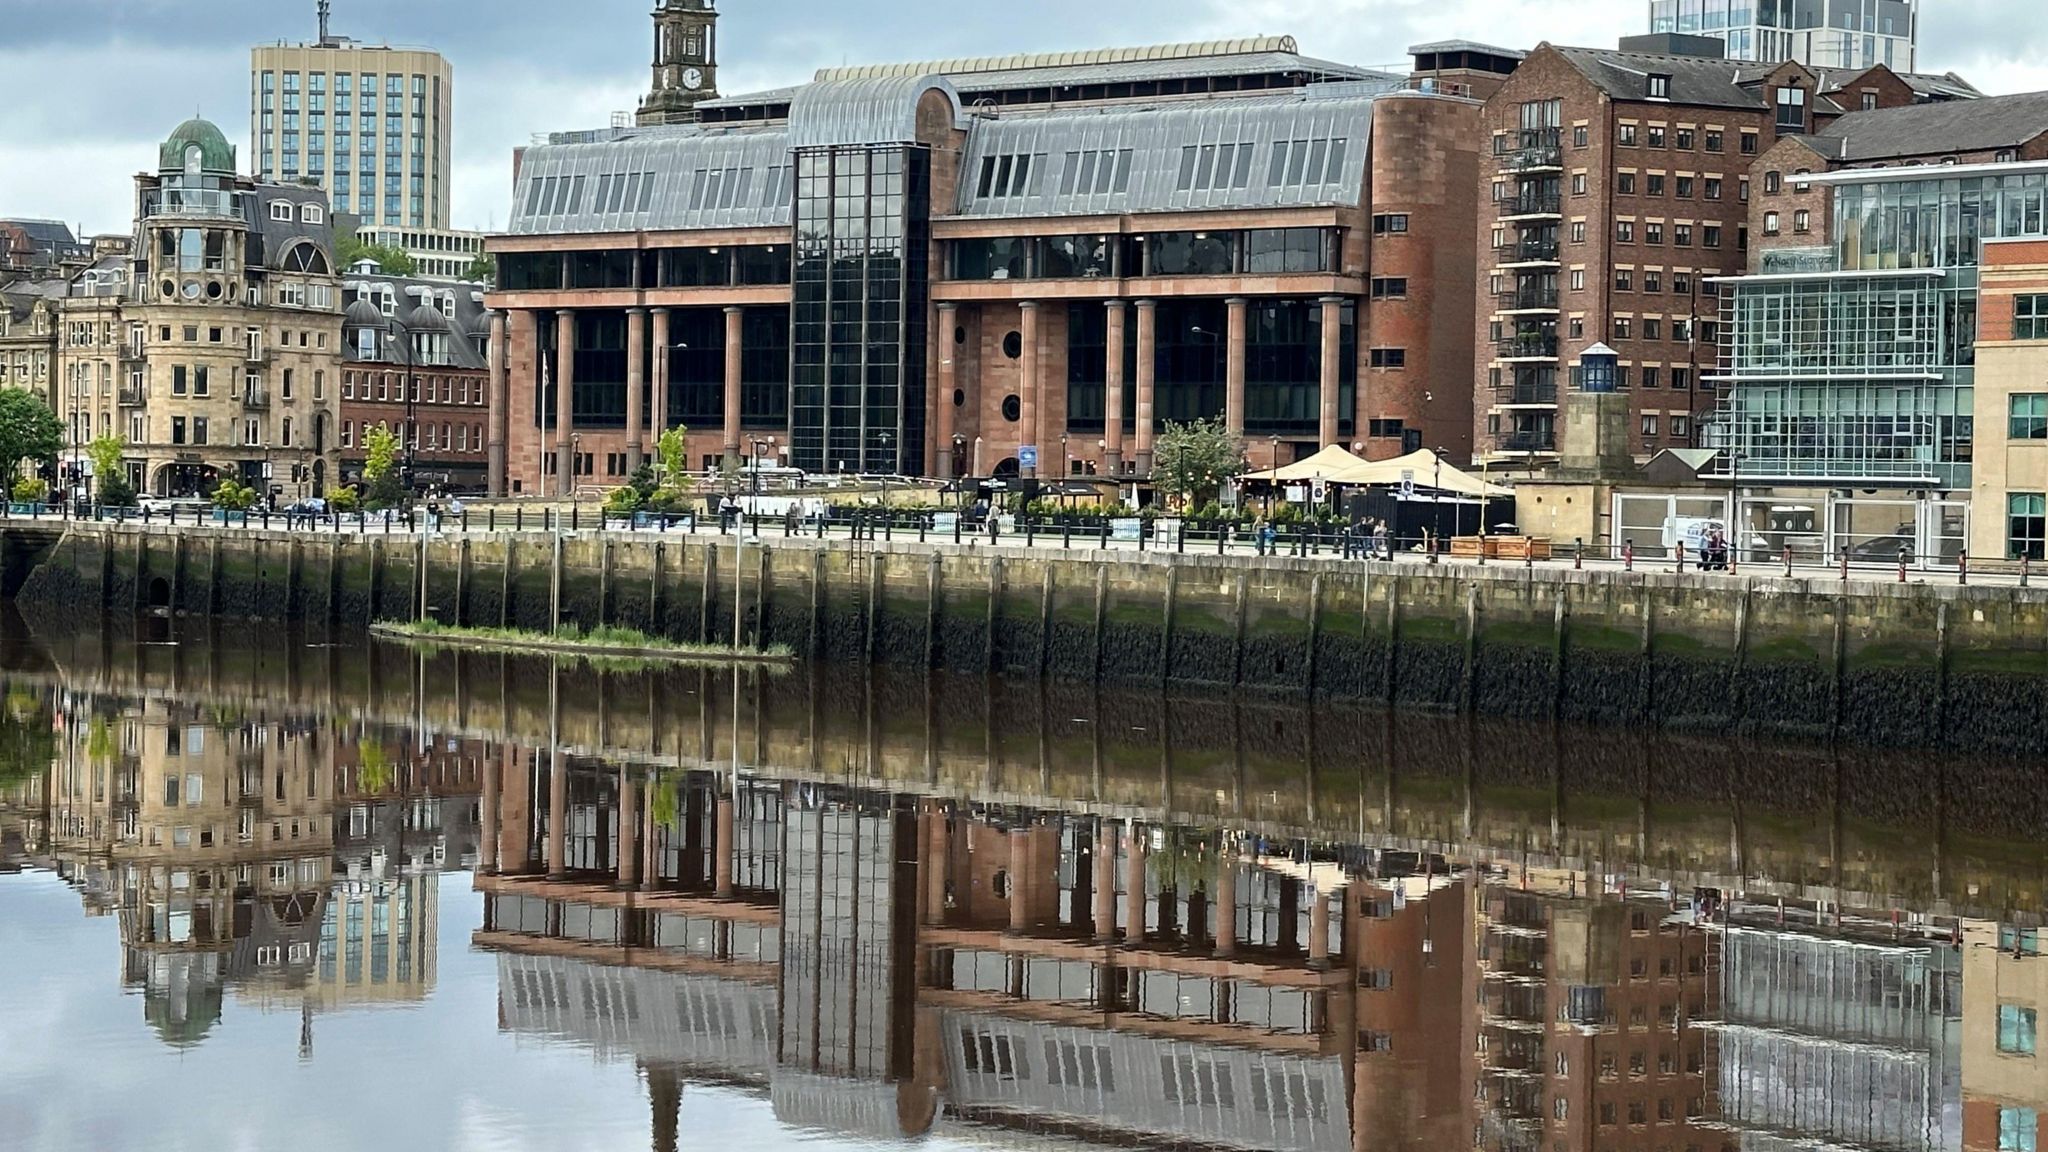 A large red court building reflected in a river running in front of it